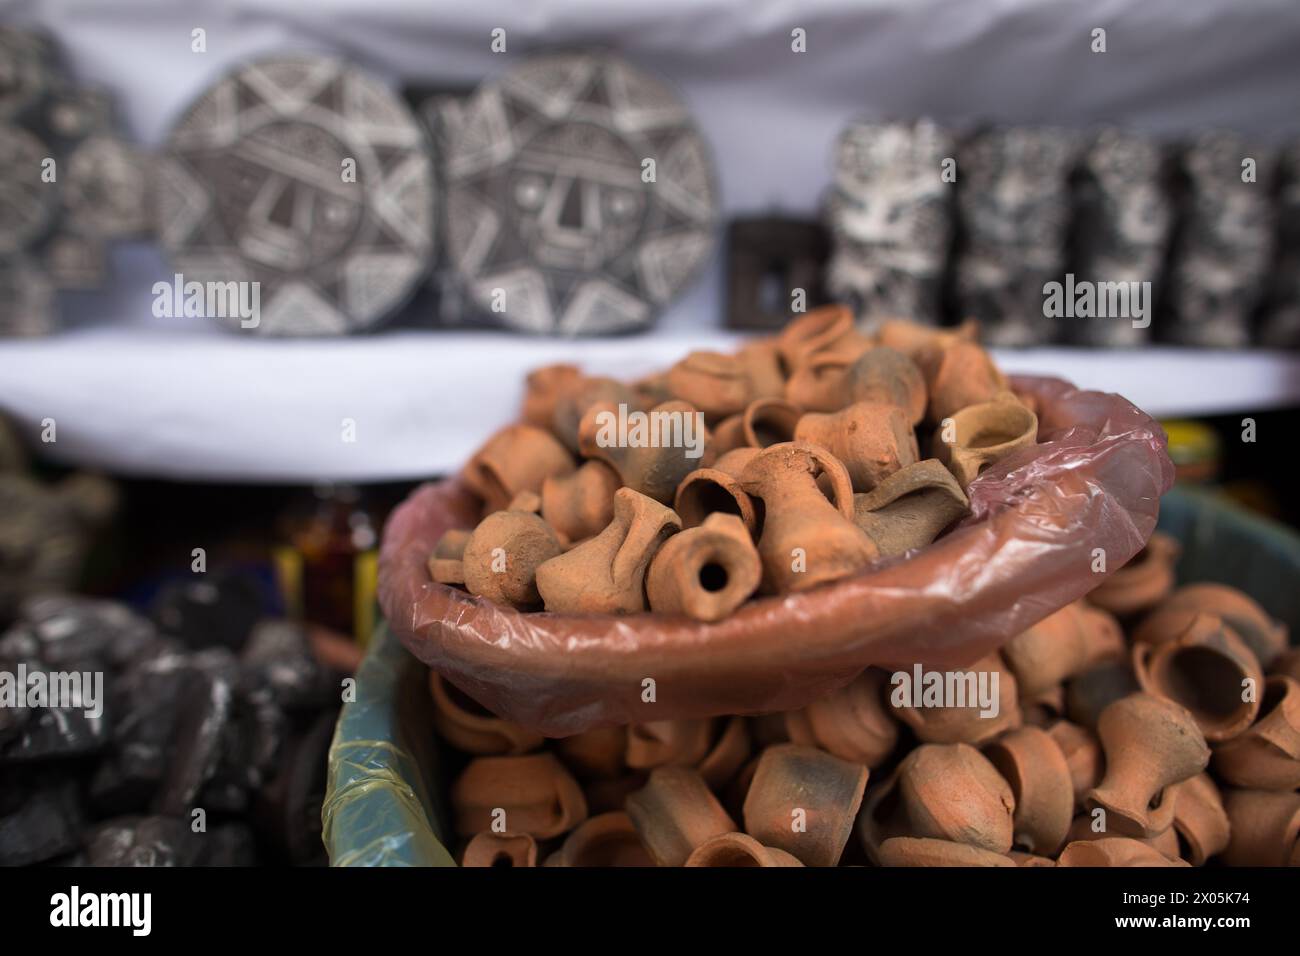 Artisan crafts, lamb foetuses, minerals, remedies and other magical and superstitious things for sale at the Witches Market in La Paz Bolivia Stock Photo